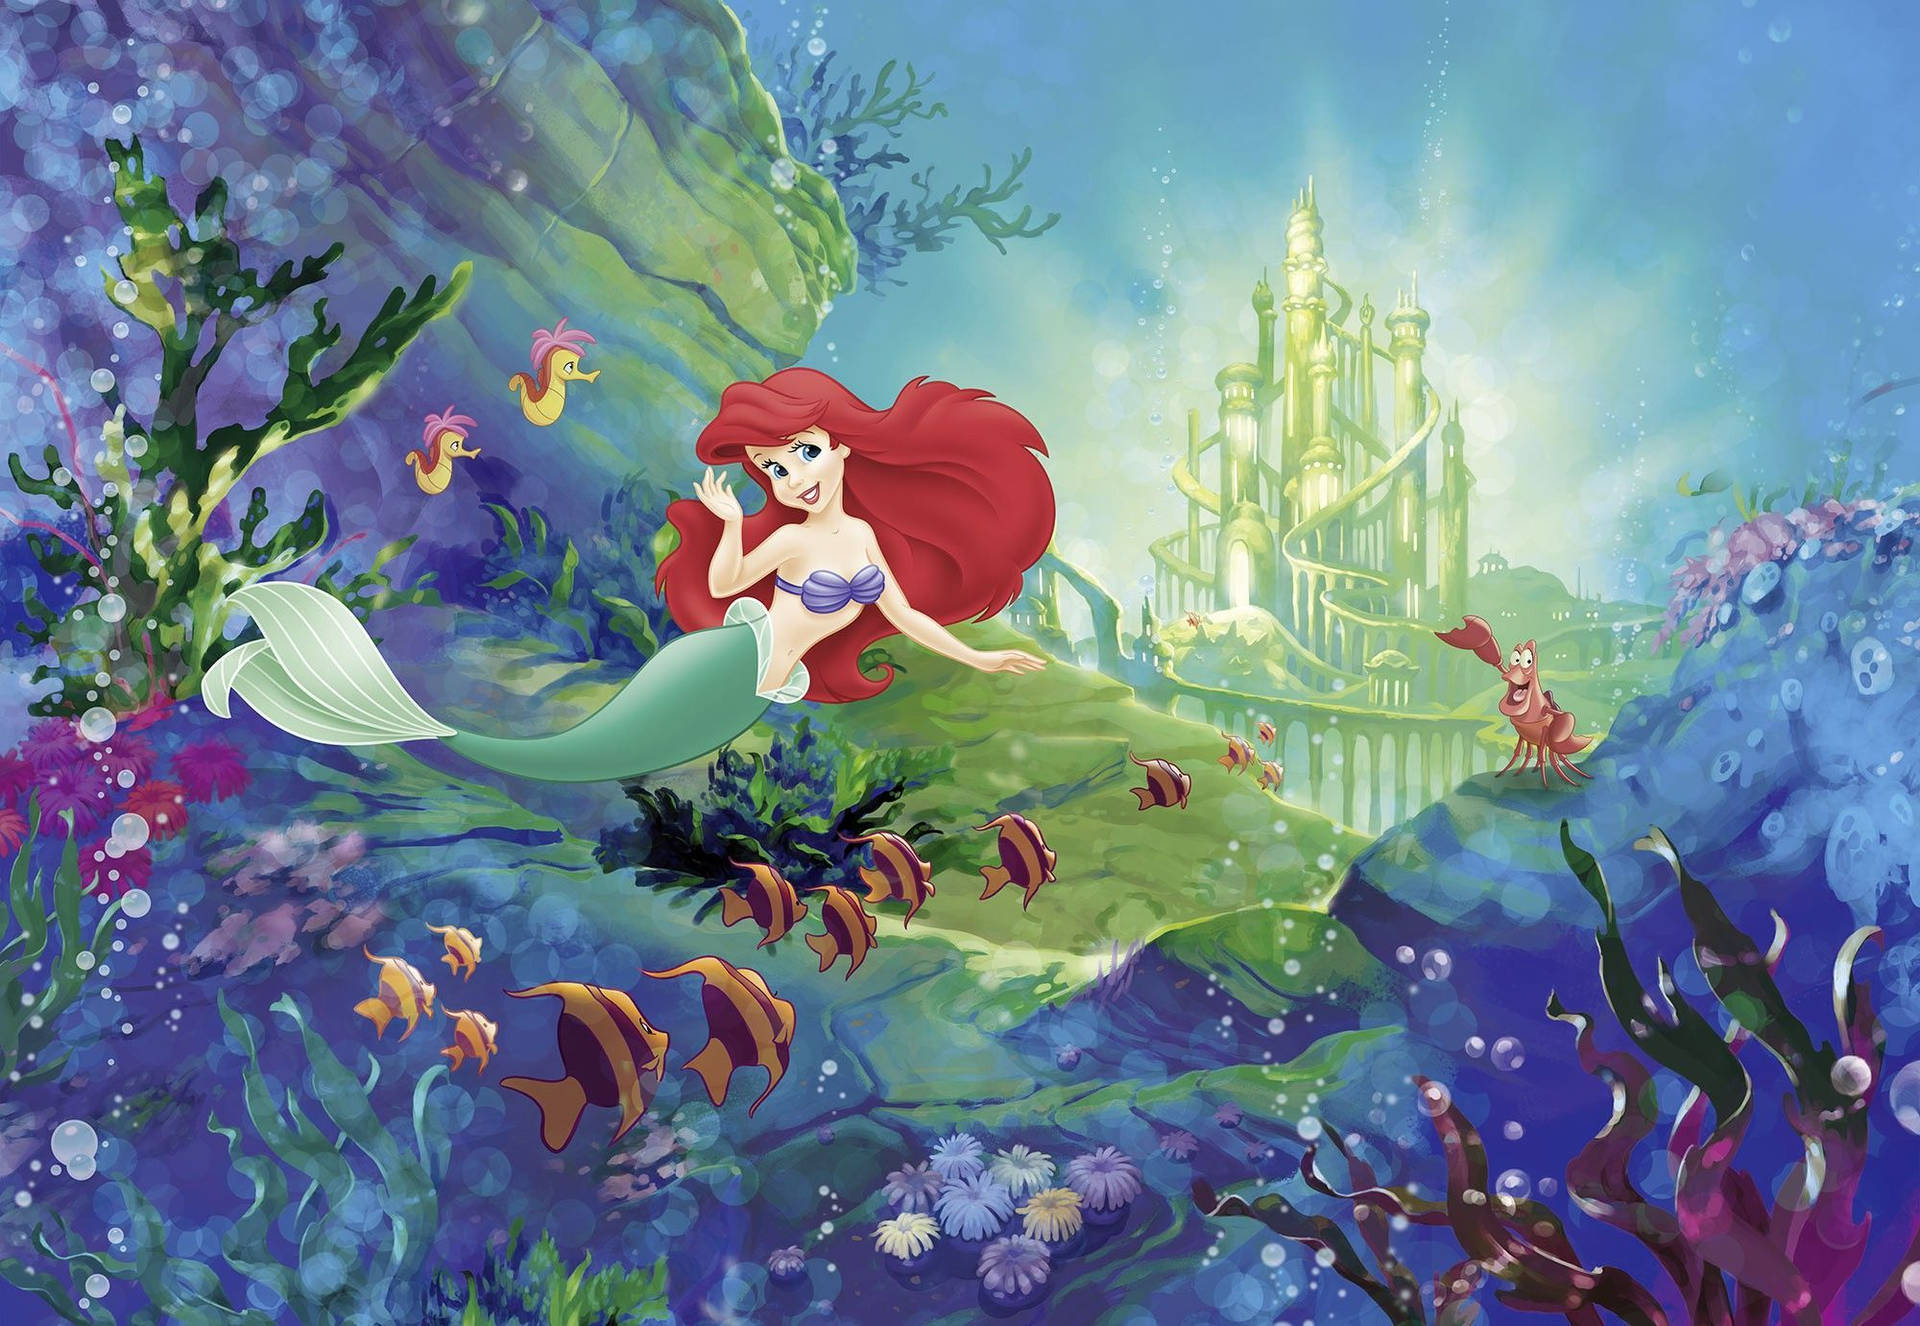 [200+] The Little Mermaid Backgrounds